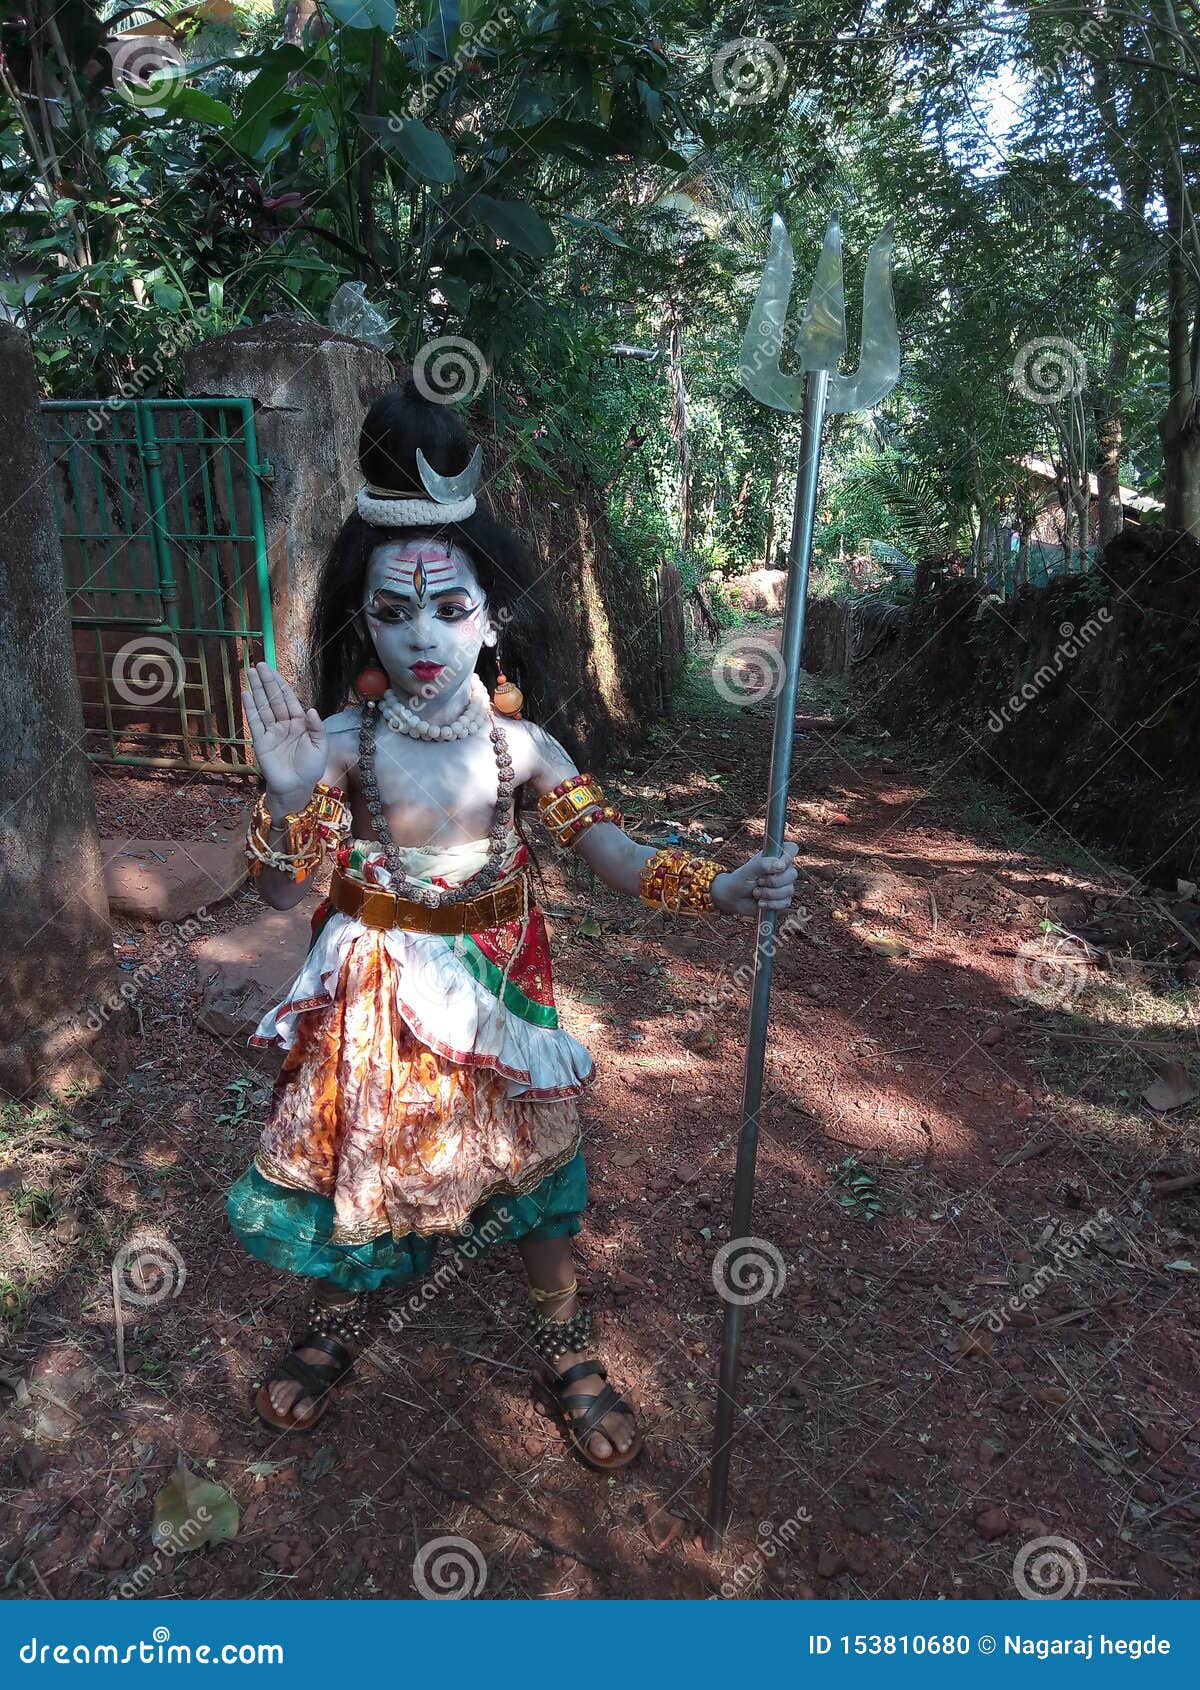 A Kid As Lord Shiva in Participate Fancy Dress Competition Stock Photo -  Image of fancy, participate: 153810680